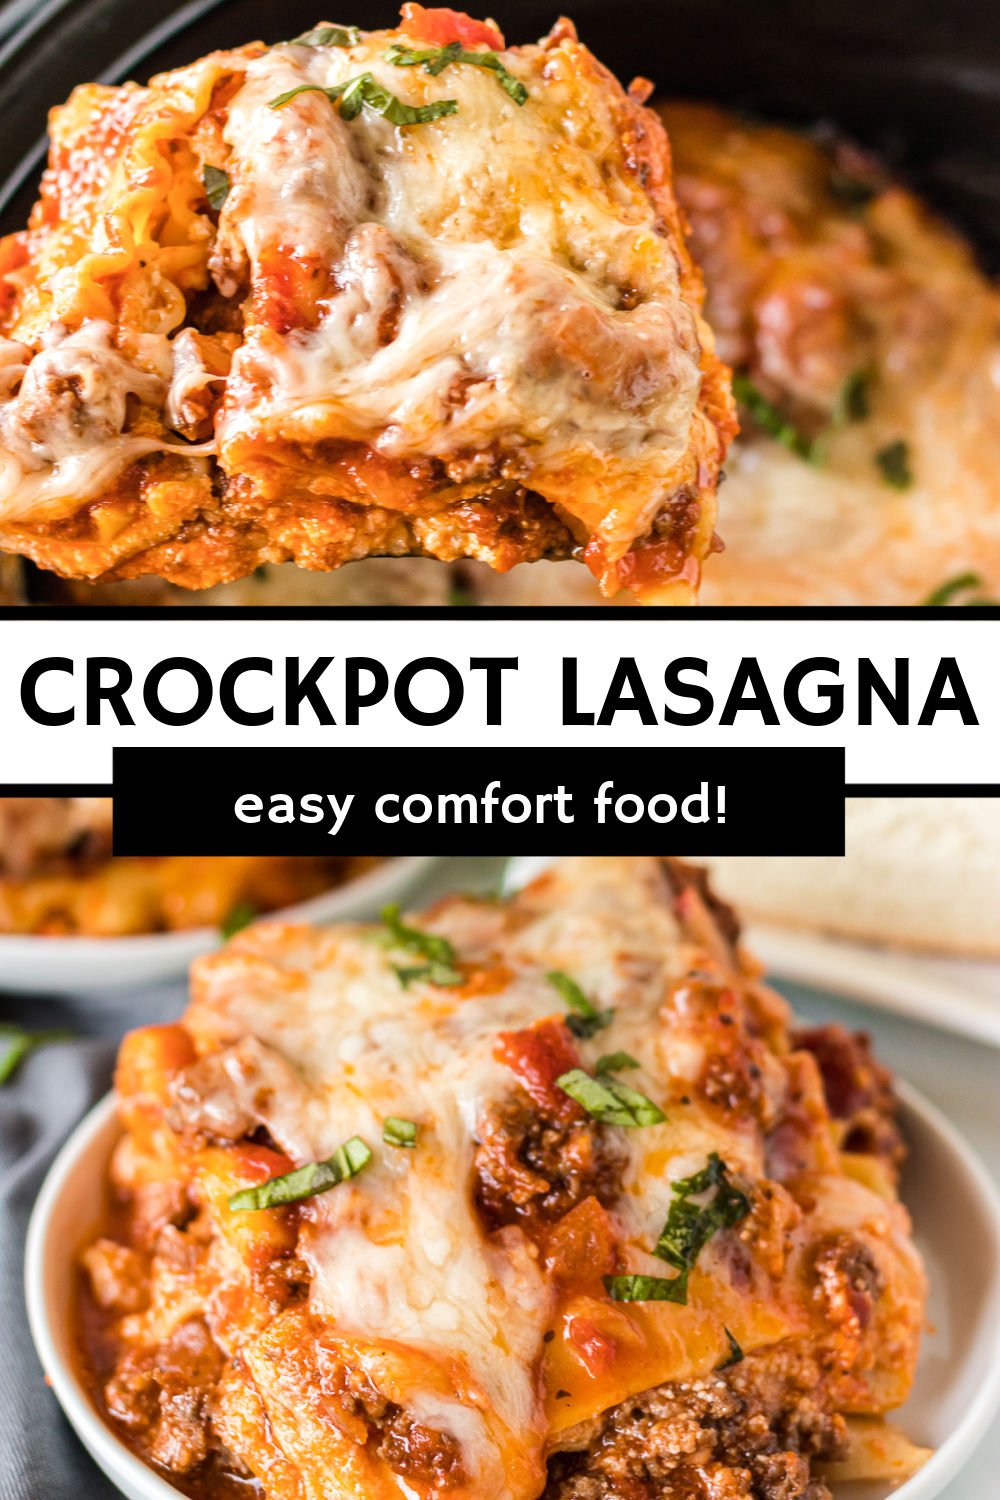 Leave the oven off and make Slow Cooker Lasagna tonight! Layers of meaty sauce, noodles, and cheese make this easy, comforting crockpot dinner a winner. | www.persnicketyplates.com